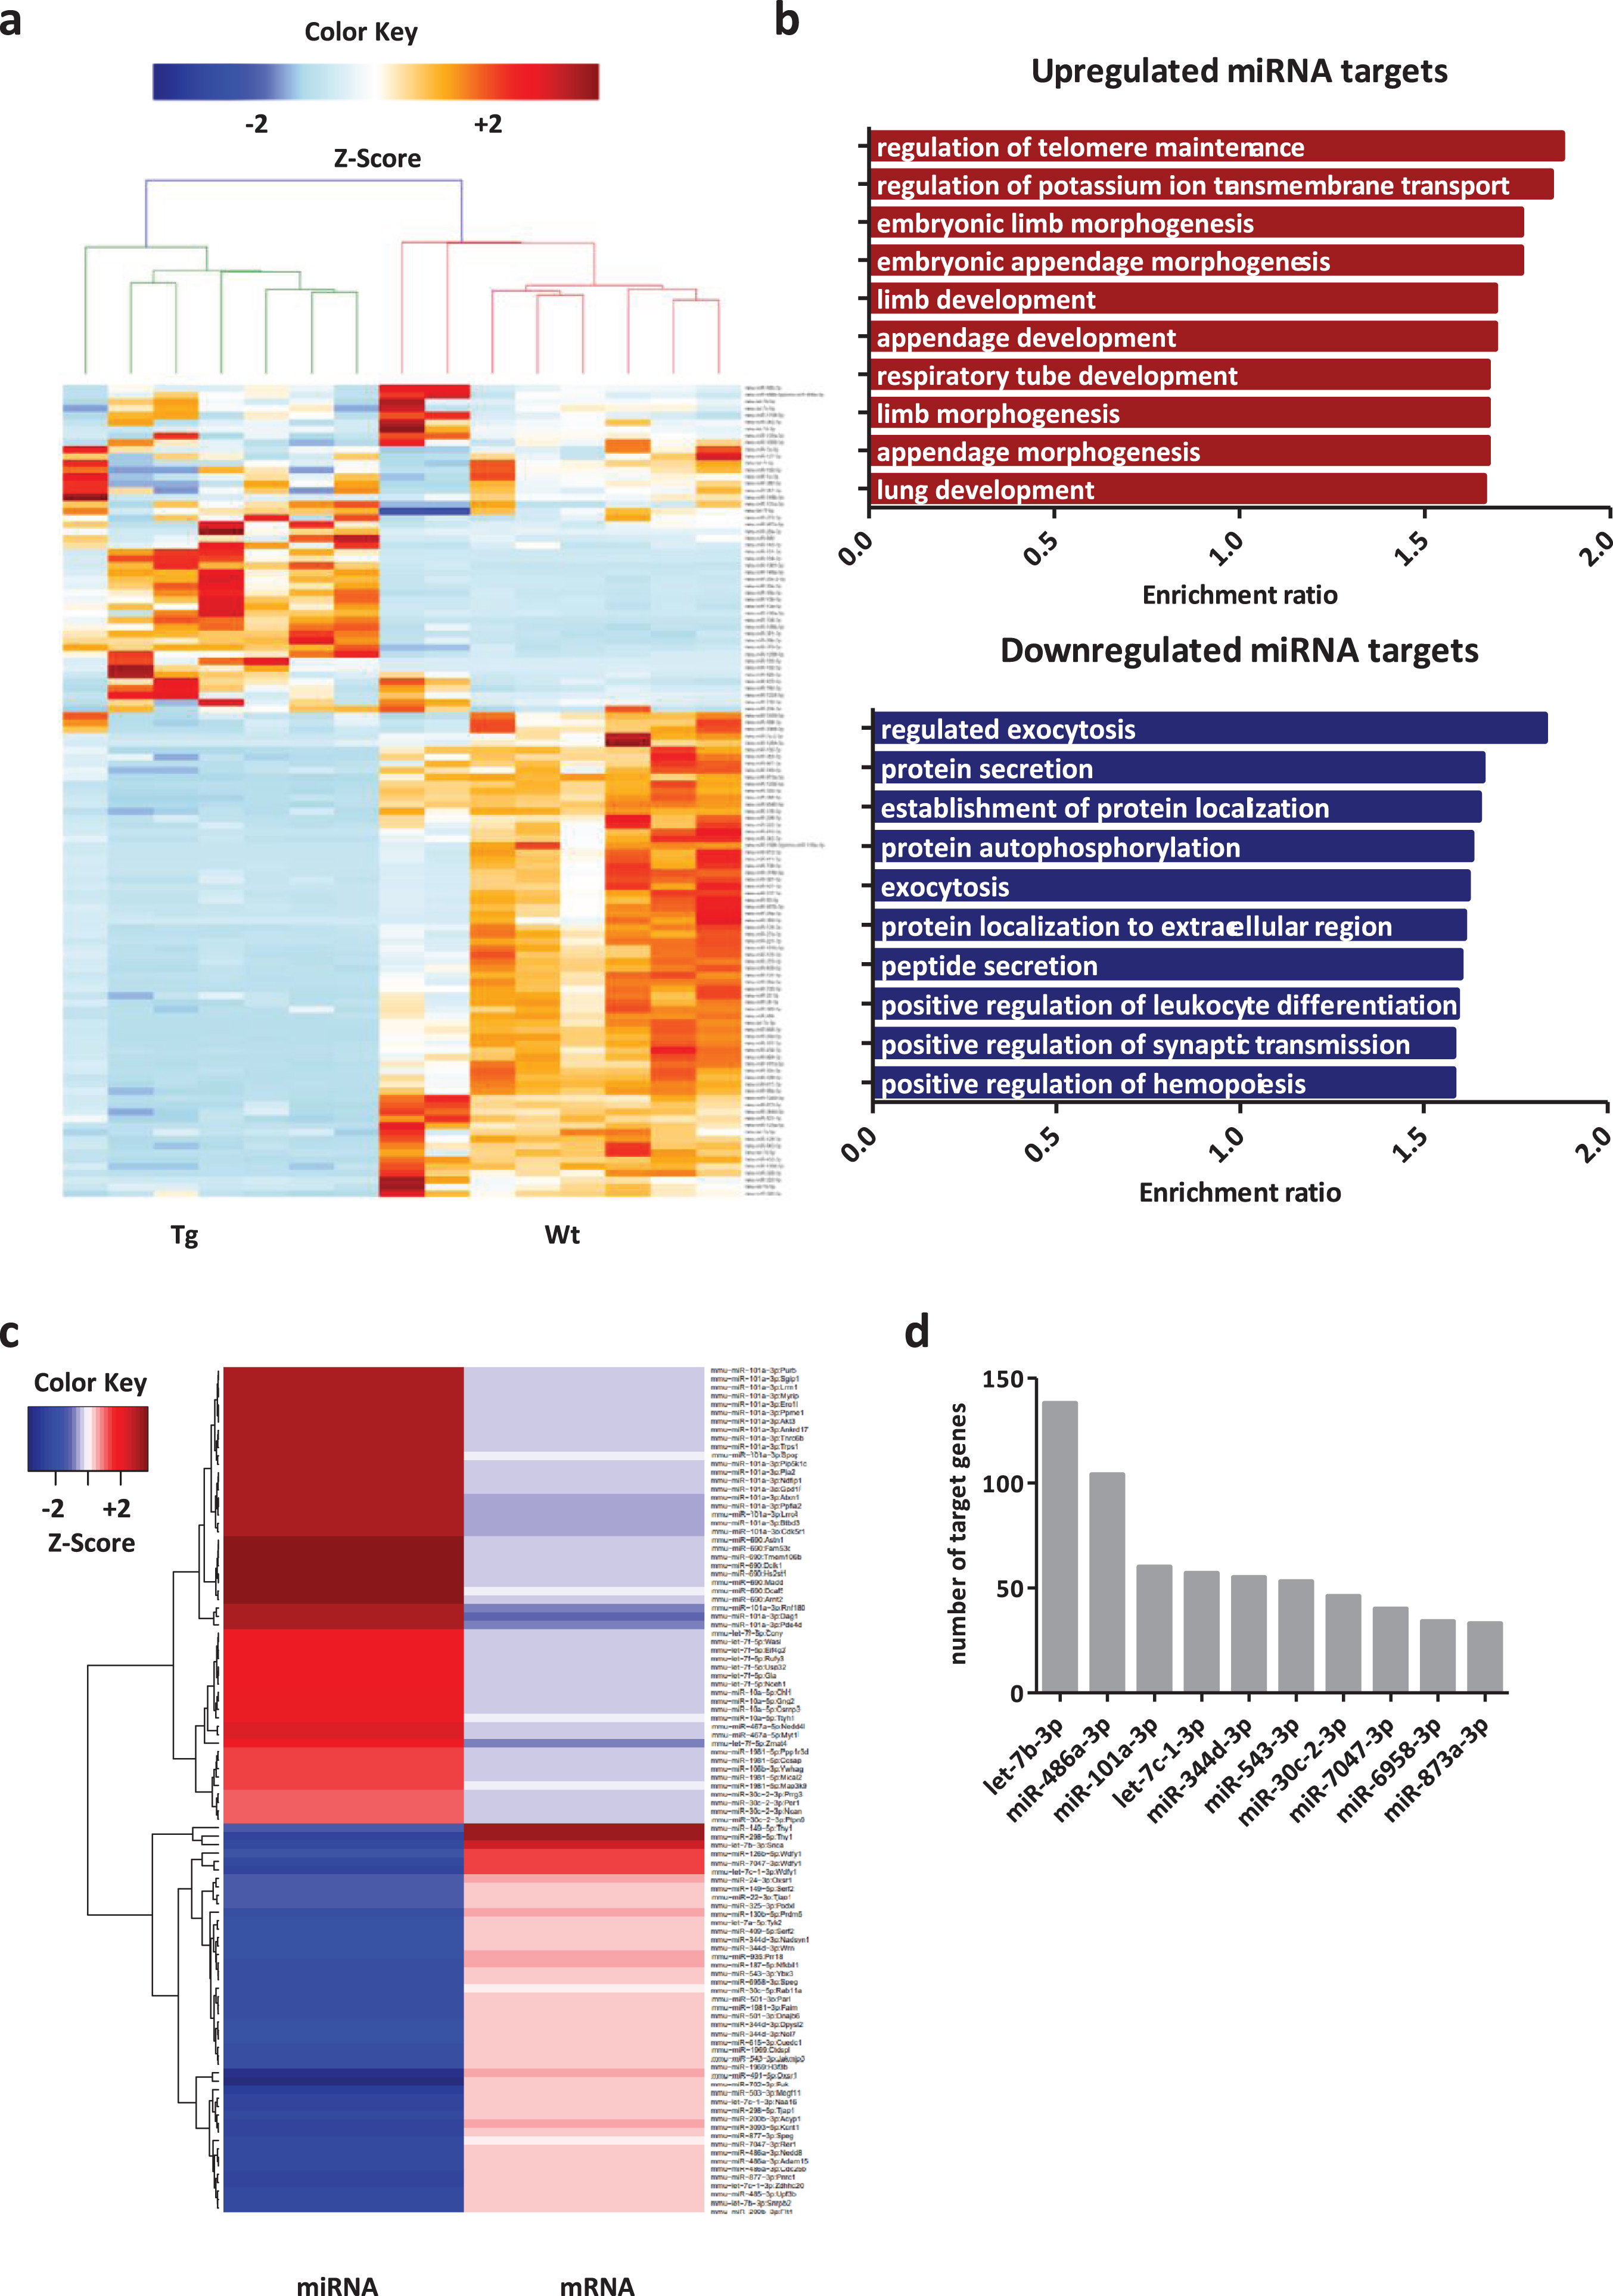 A30P αsyn expression alters midbrain miRNA expression. a) Heatmap illustrating differentially expressed miRNAs between Wt and Tg mice. The color key indicates expression levels ranging from lower (blue) to higher (red) expression. b) Enrichment ratio of overrepresented Gene Ontology terms of upregulated and downregulated miRNA targets. c) Heatmap illustrating negative interactions among deregulated miRNAs and mRNAs. The color key indicates expression levels ranging from lower (blue) to higher (red). d) Histogram plotting top interacting miRNAs according to number of target genes.